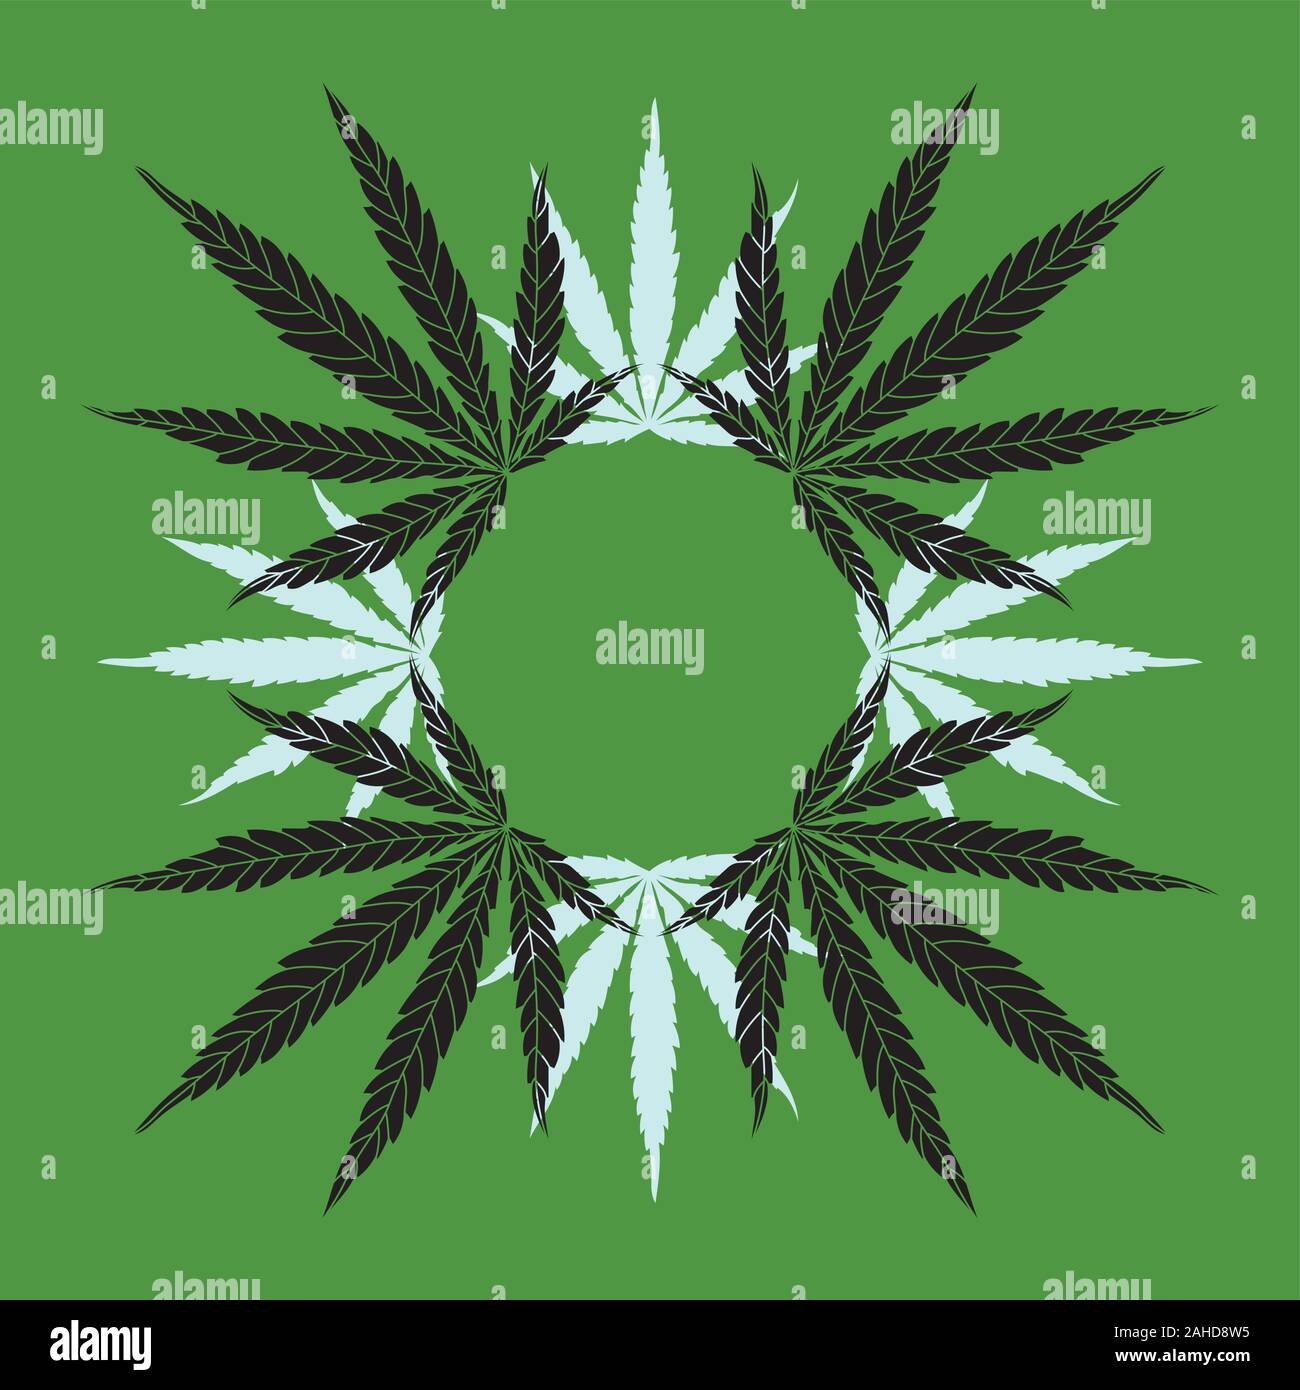 Hemp Leaf Mandala Wreath on Green Background. Vector Line Cannabis Leaves Drawing and Silhouettes Stock Vector